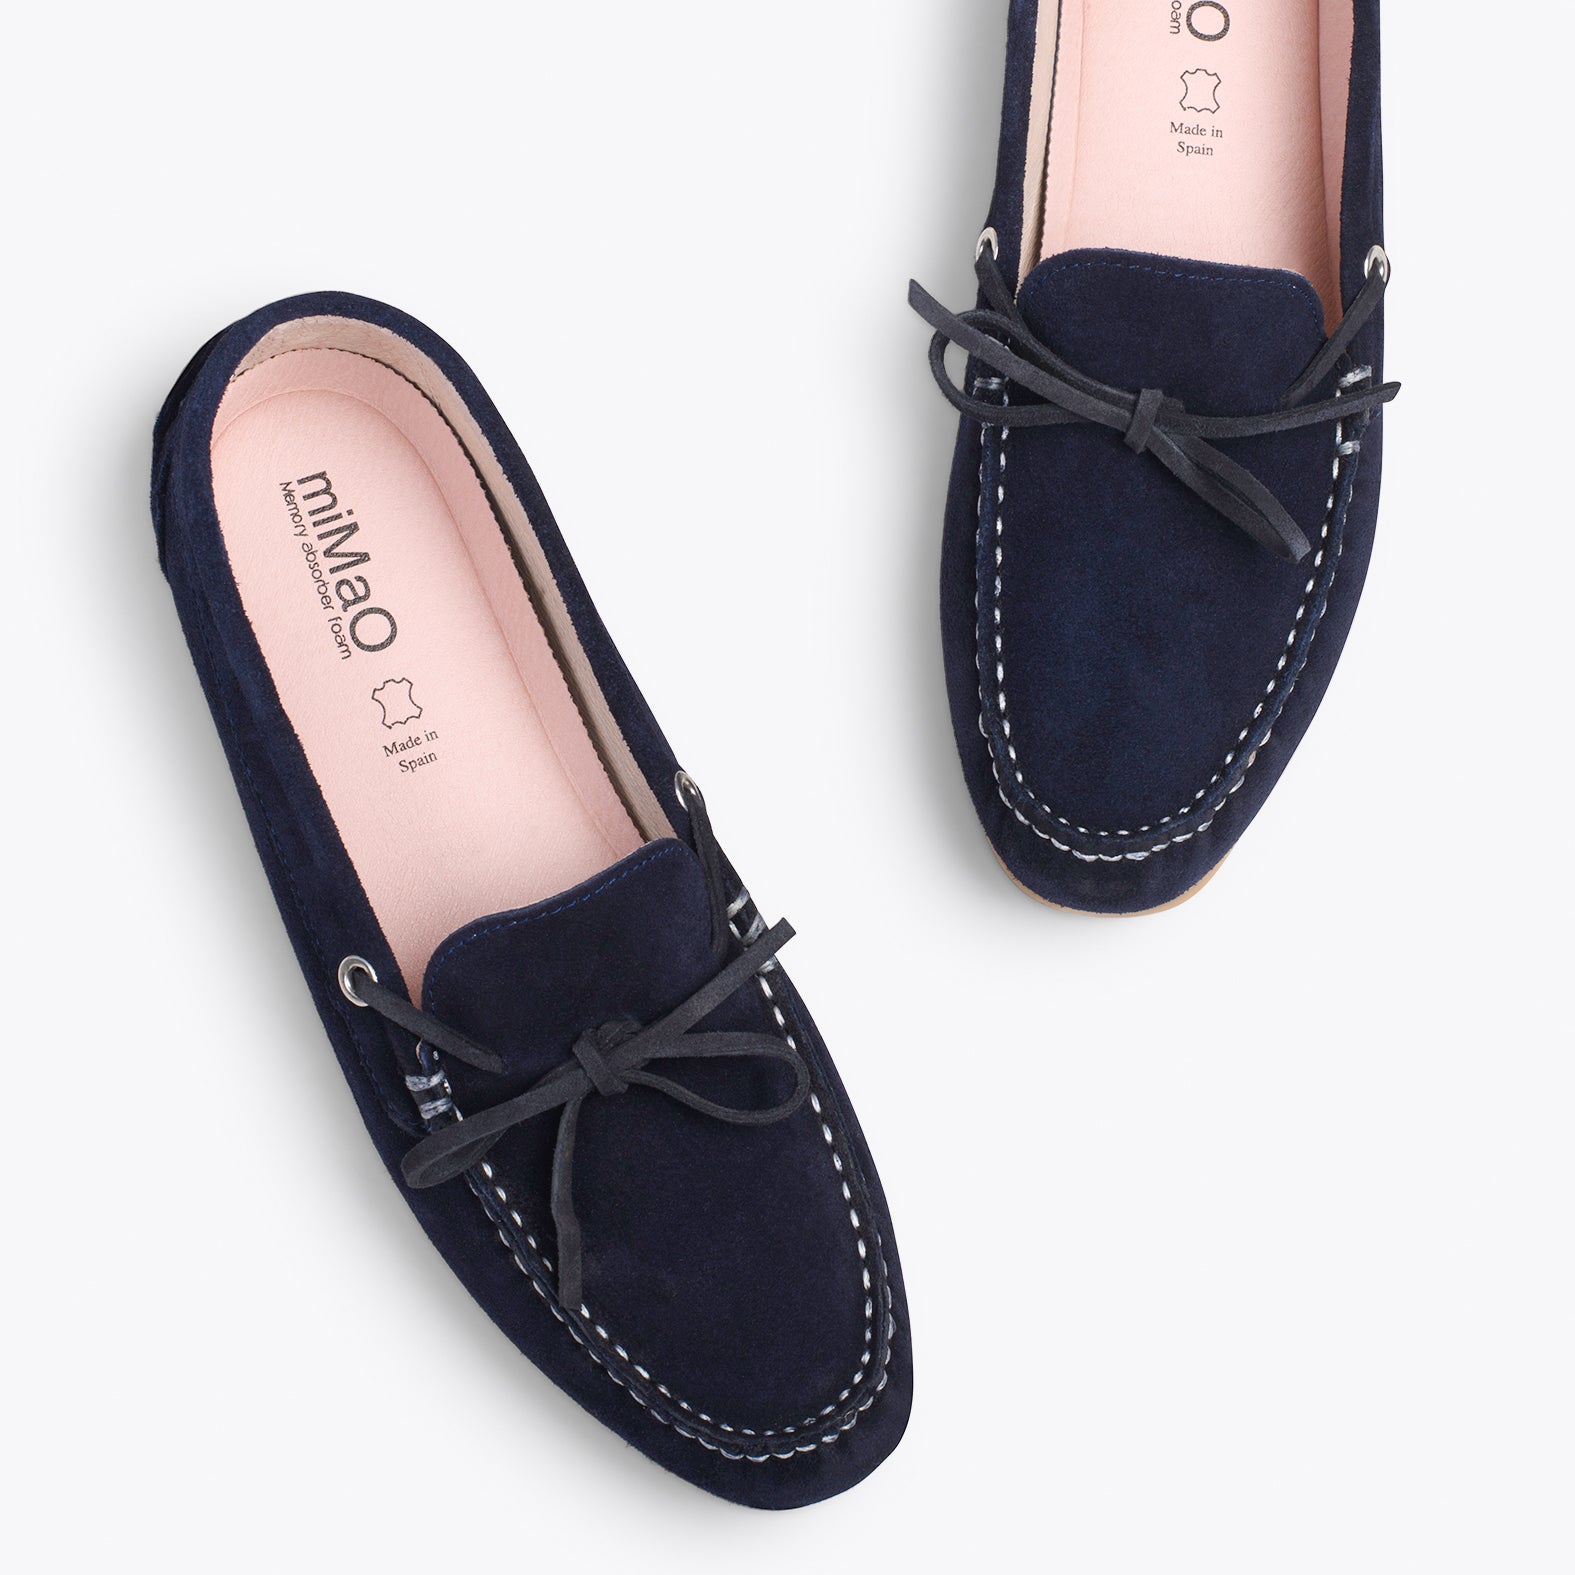 LACE – NAVY moccasins with removable insole